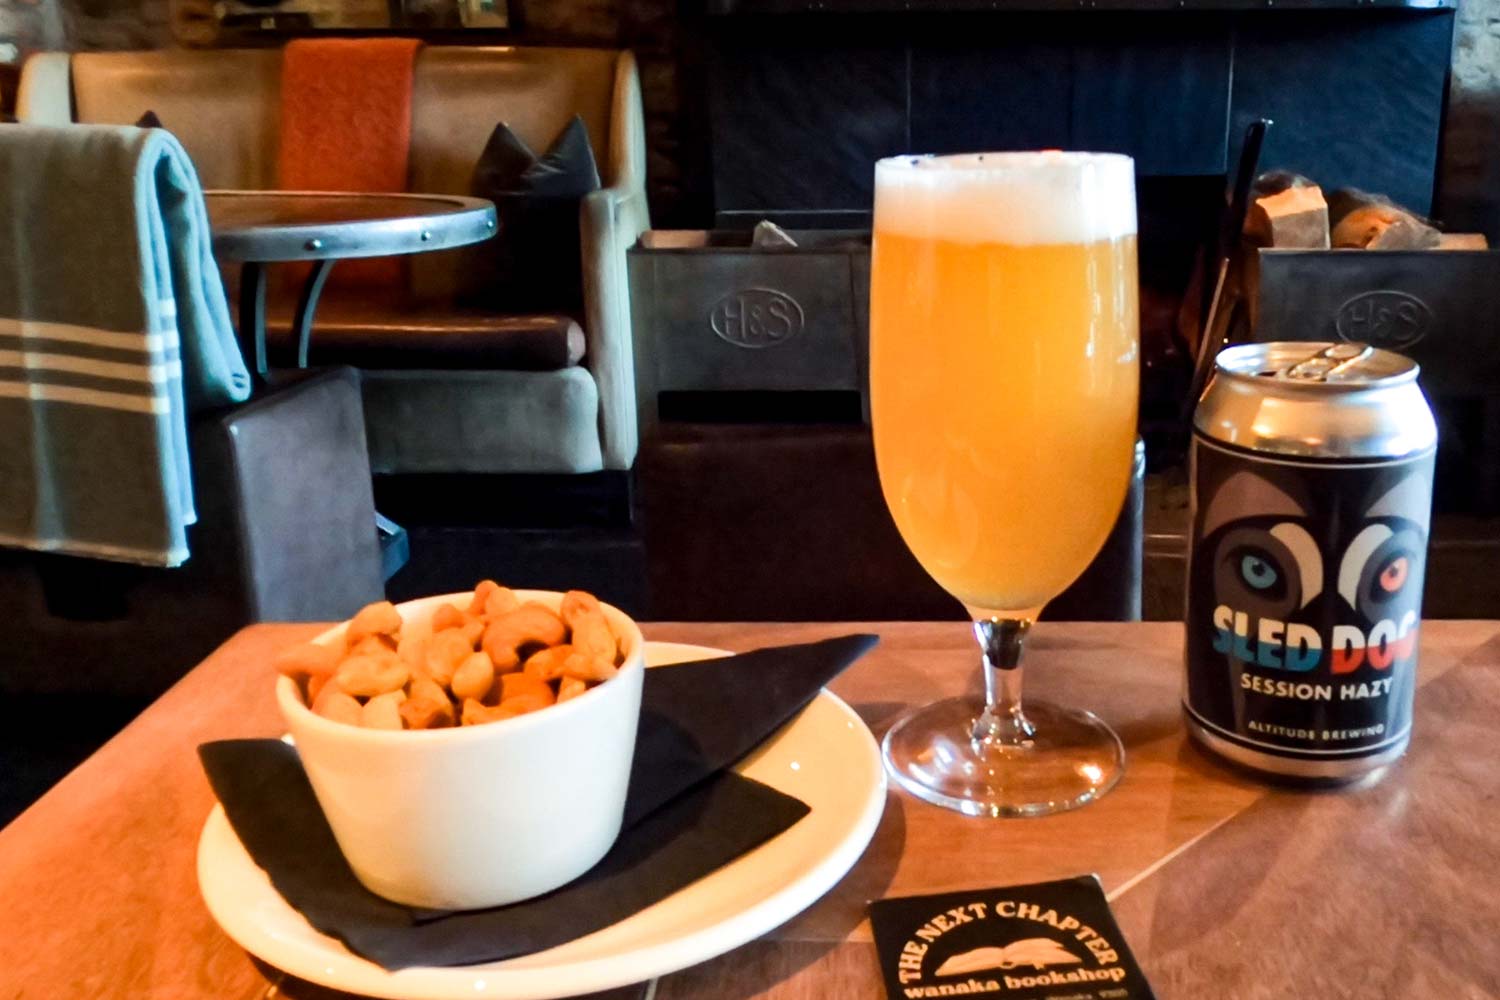 A glass of craft beer and a slightly salted bowl of roasted cashew nuts